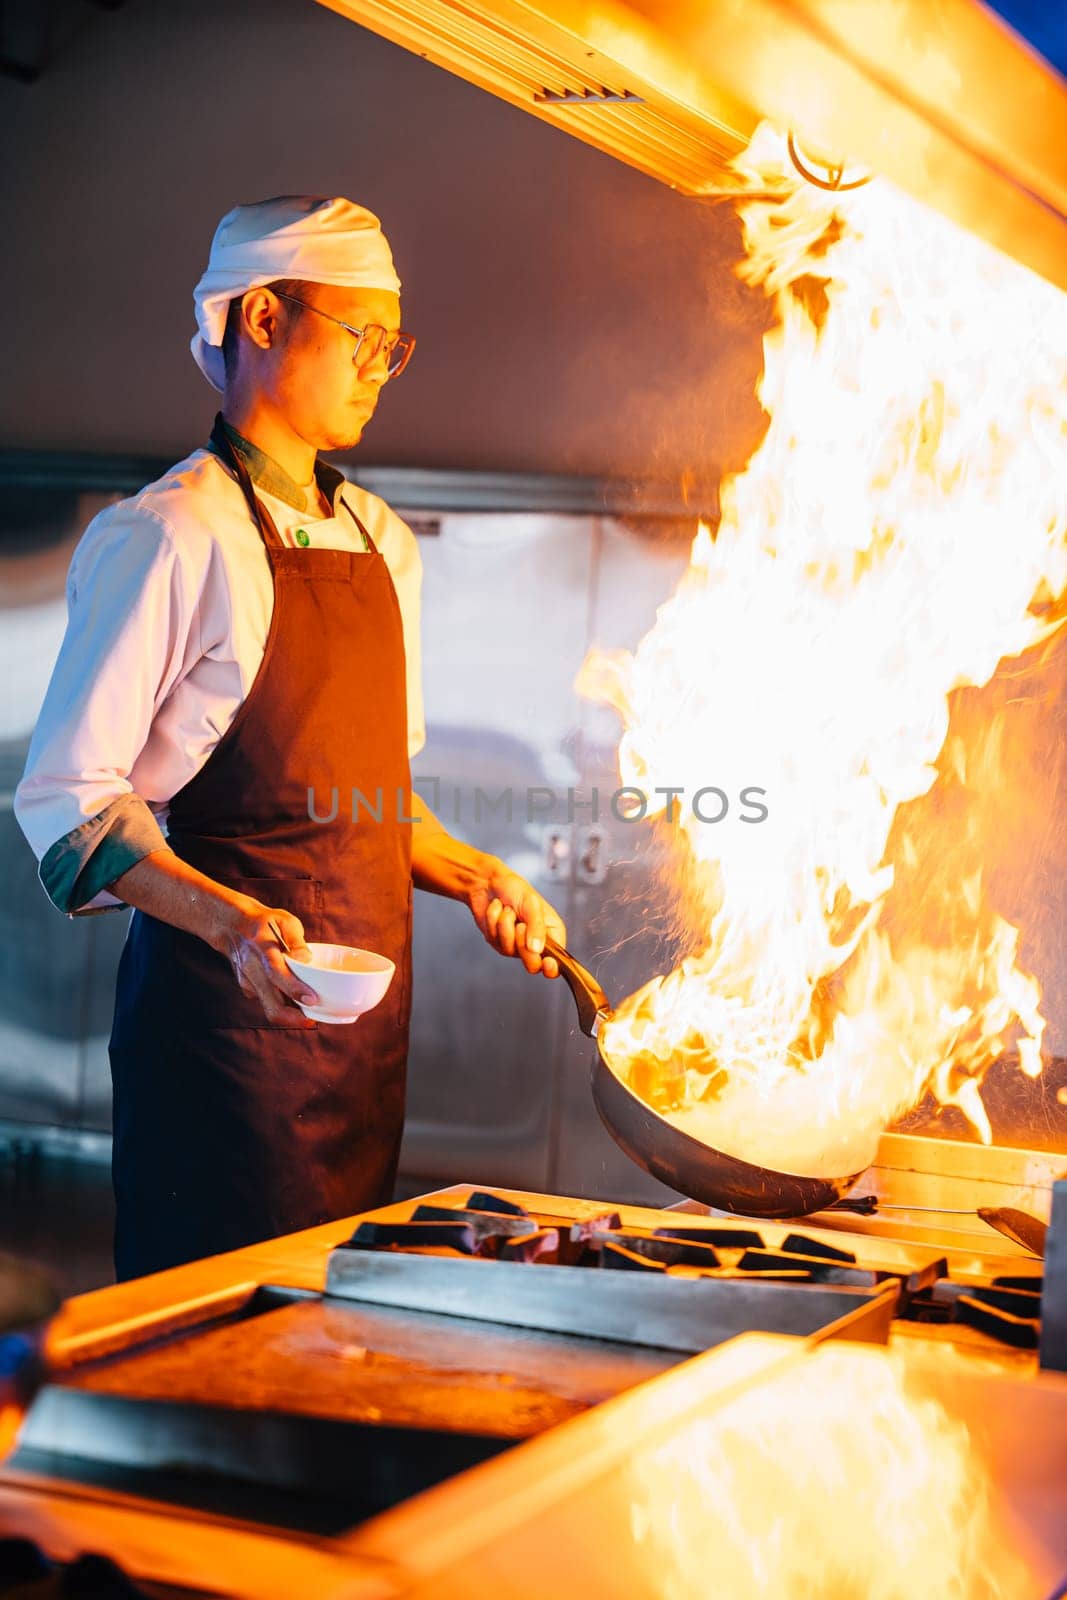 In professional kitchen chef hands handle flaming wok. Closeup of cooking expertise flames at work. Skillful chef burning food working in a modern kitchen setup. cook food with fire by Sorapop